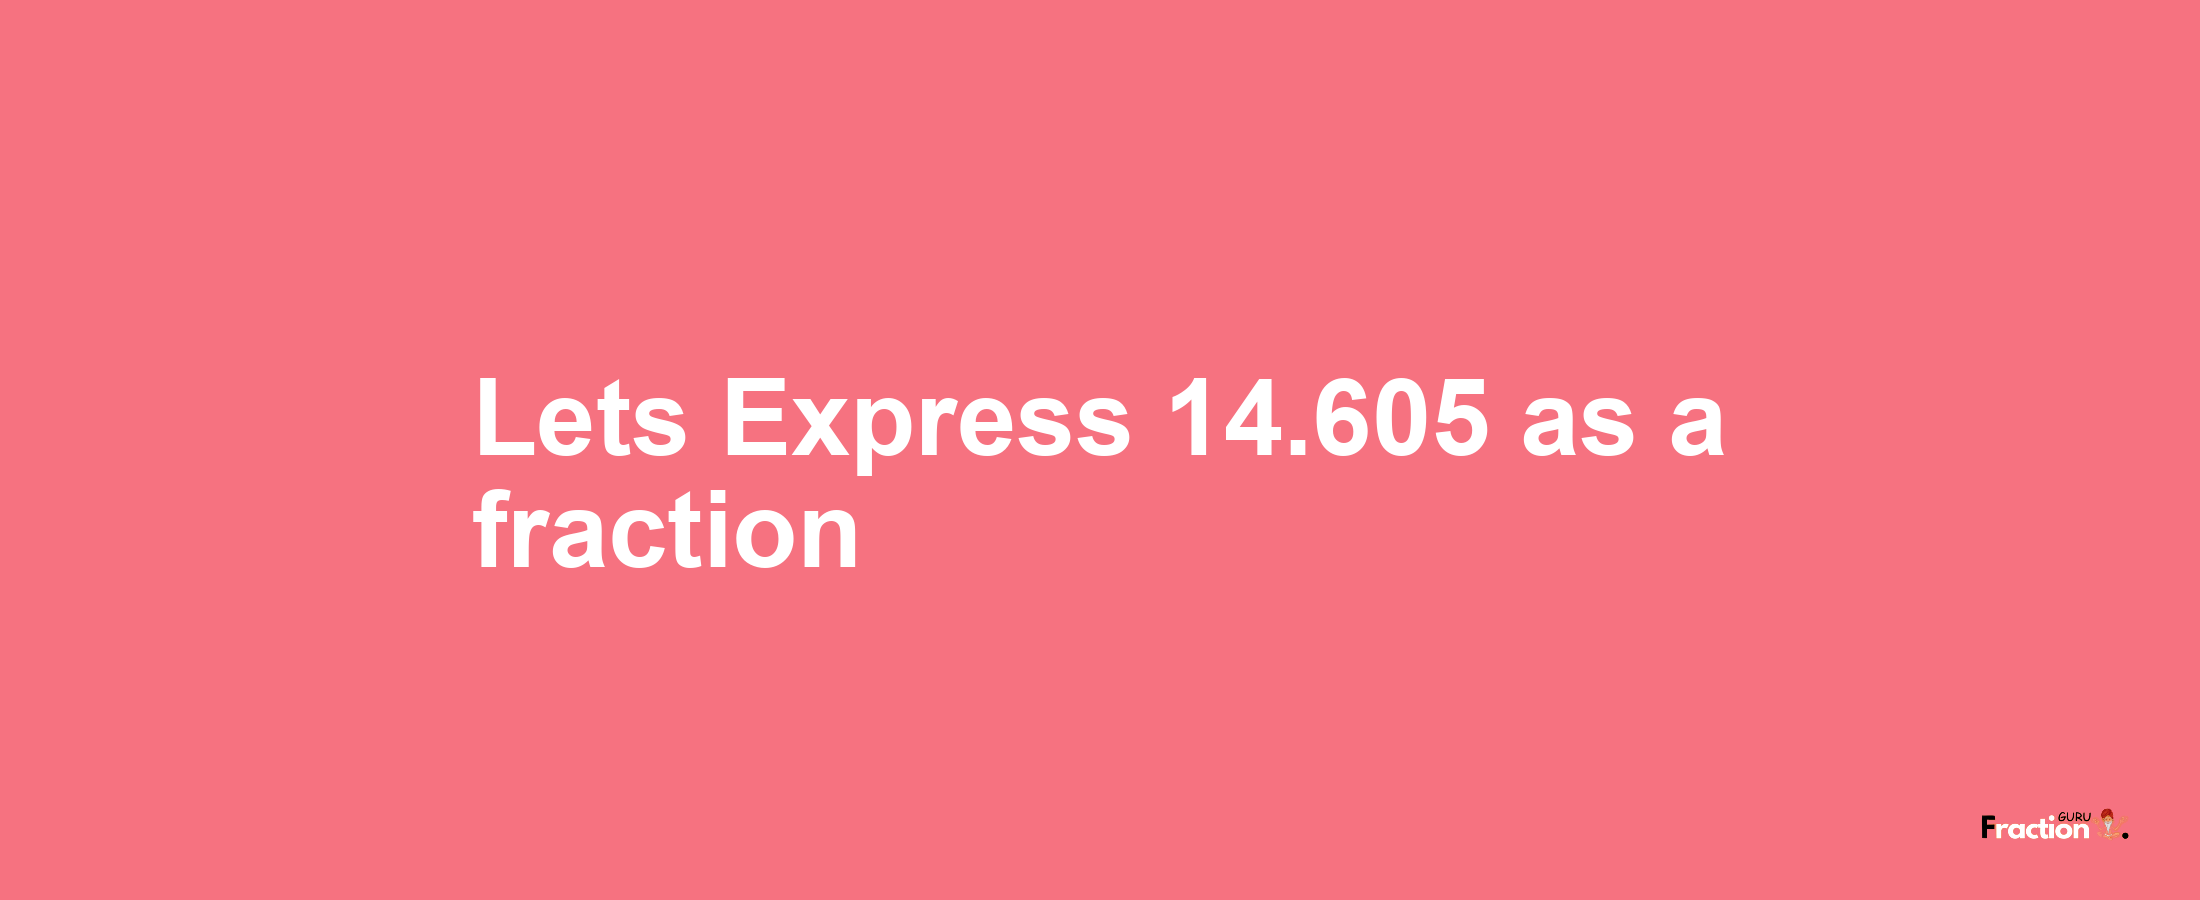 Lets Express 14.605 as afraction